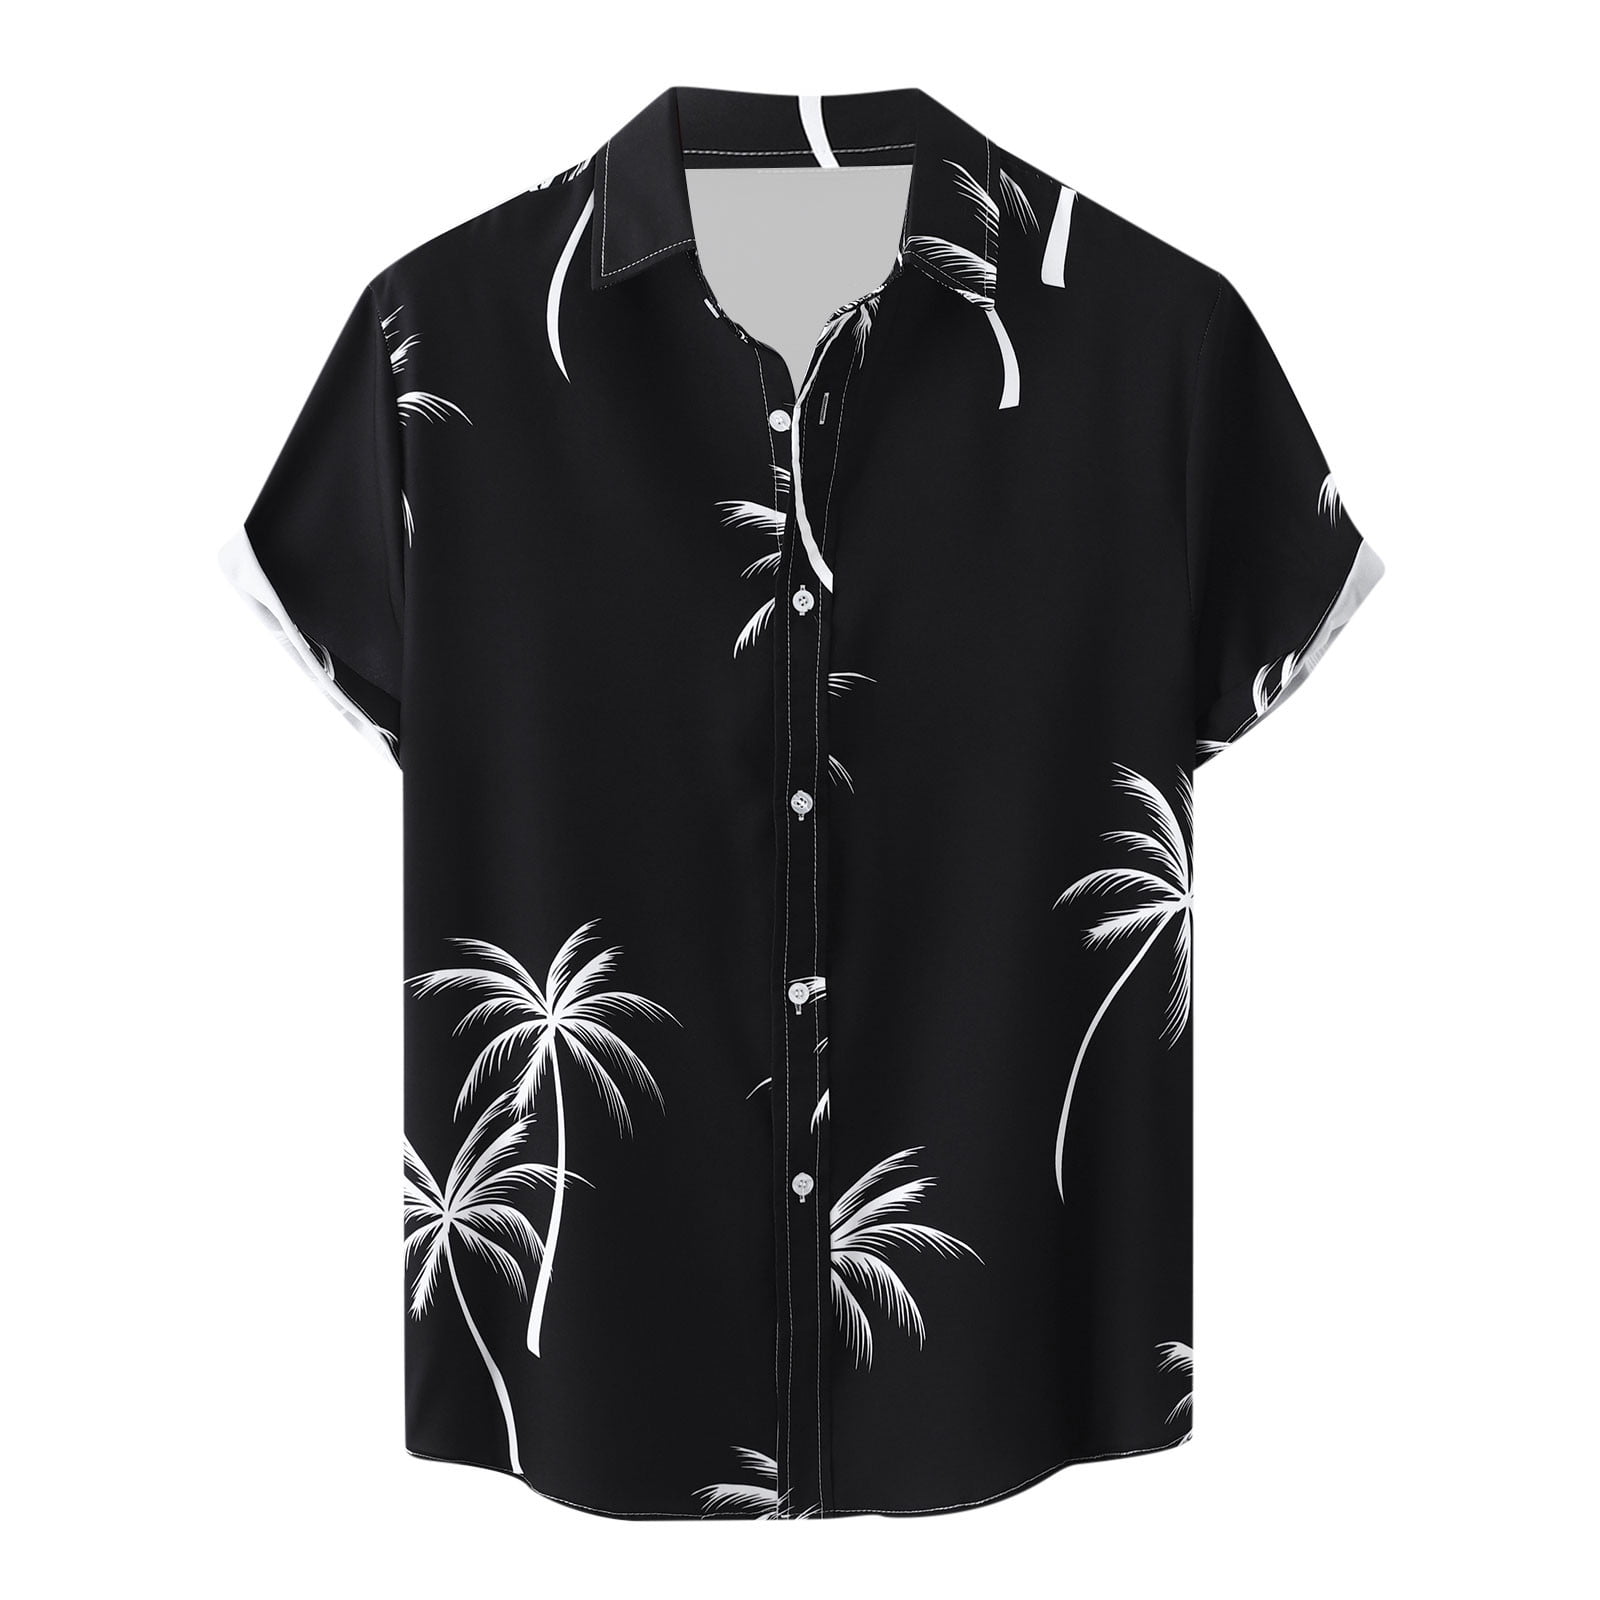 ZCFZJW Tropical Beach Shirts for Men Hawaiian Style Casual Short Sleeve  Button Down Palm Tree Print T Shirts Regular Fit Holiday Gift Tops Black  XXXL